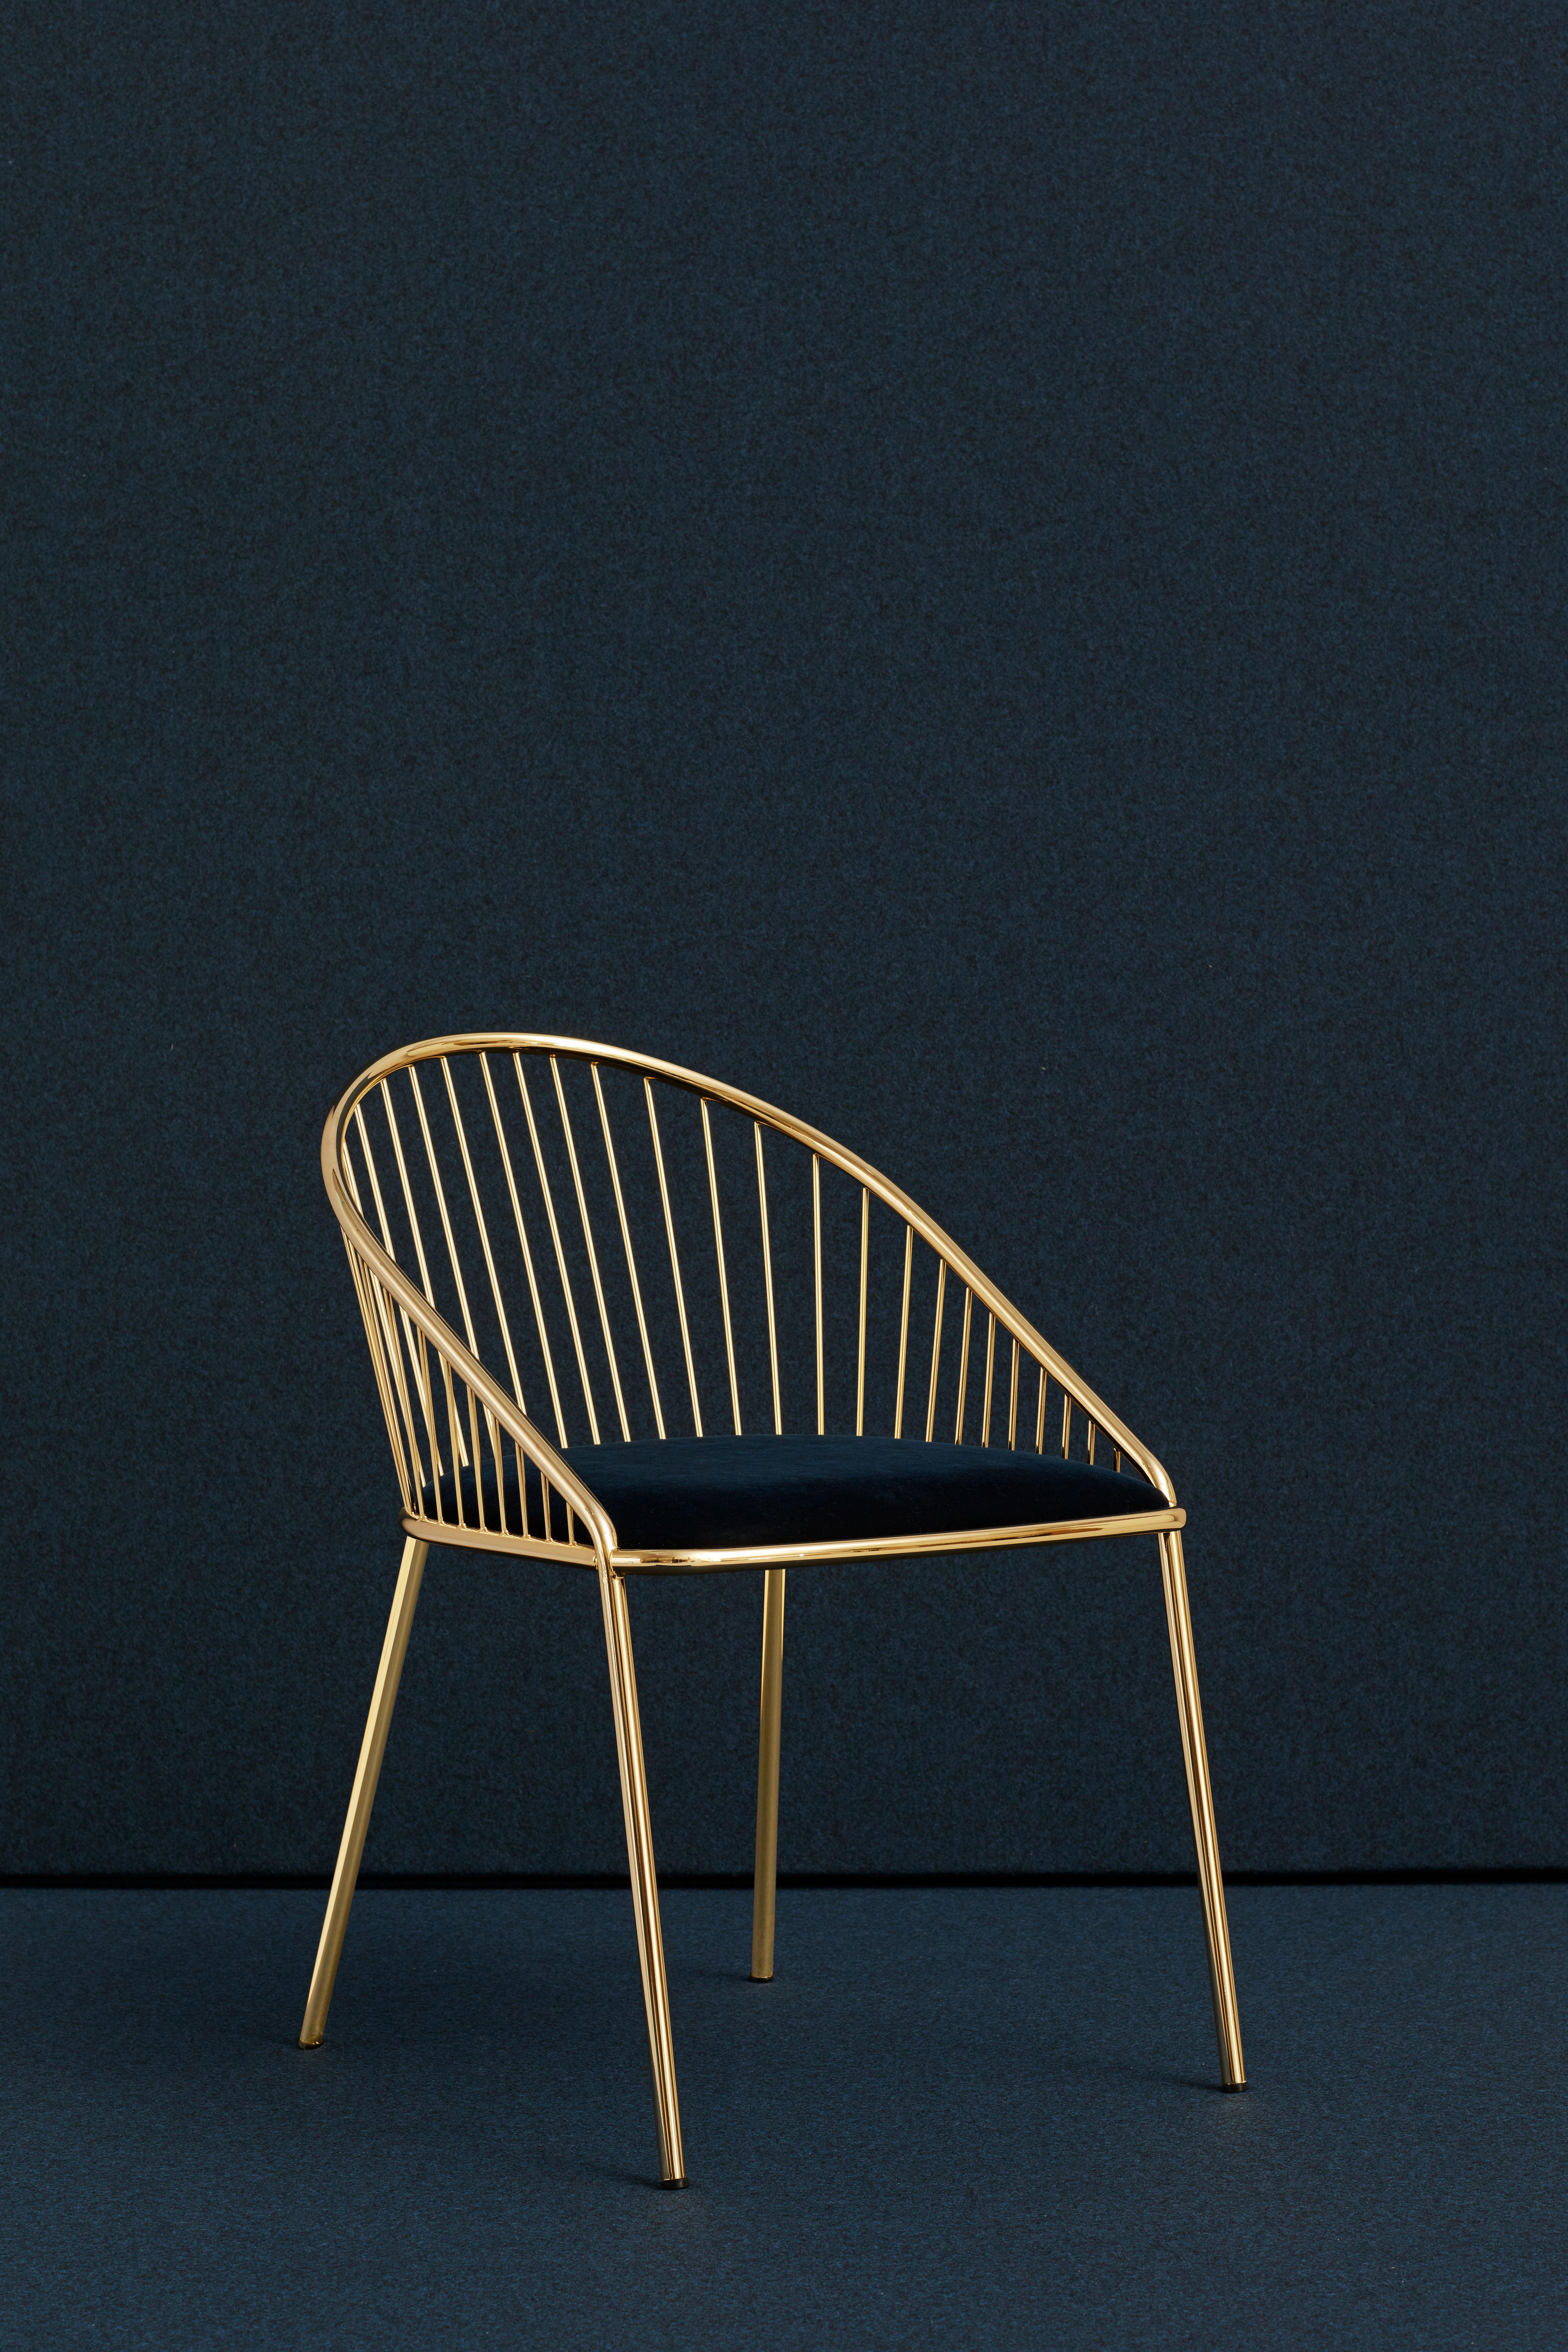 About 
Agora Collection, black and gold chair 

Agora is a fresh take on wire chairs designed by Pepe Albargues. It exquisitely combines vintage and modern lines offering a light, contemporary and minimal design that mainly brings the attention